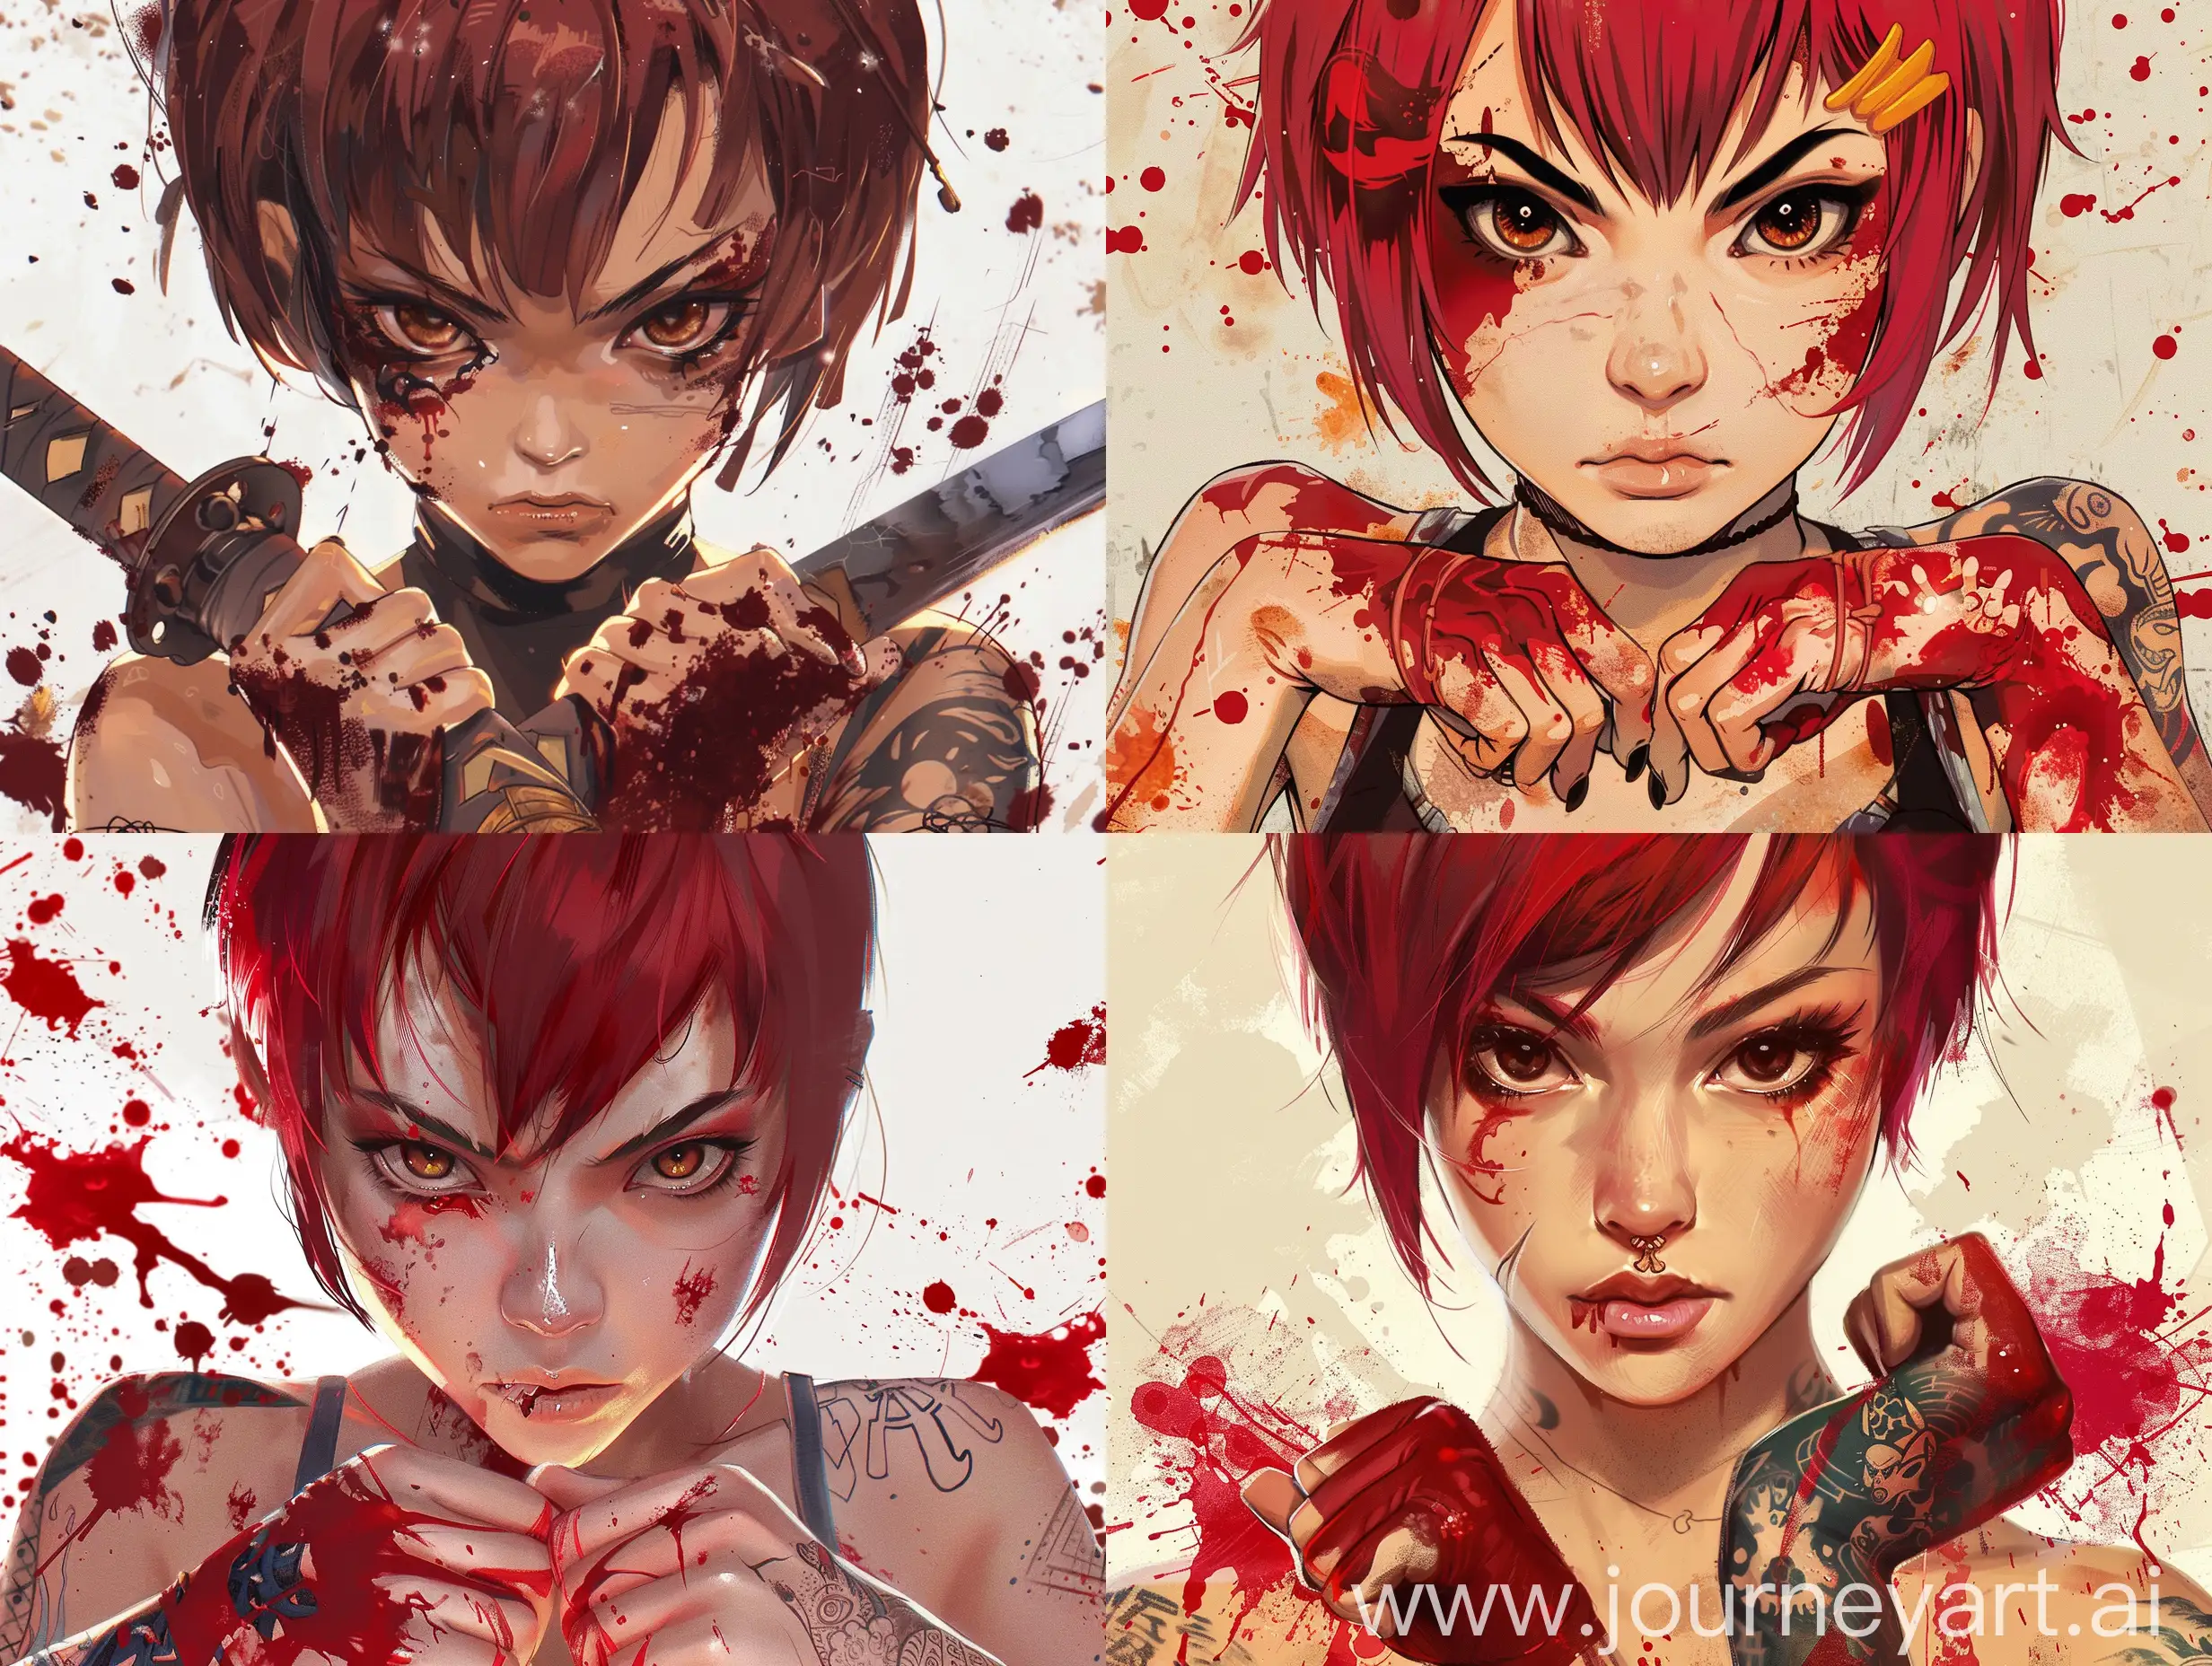 Fierce-Samurai-Teen-Girl-with-Red-Hair-and-Tattooed-Hands-Amidst-Blood-Splatters